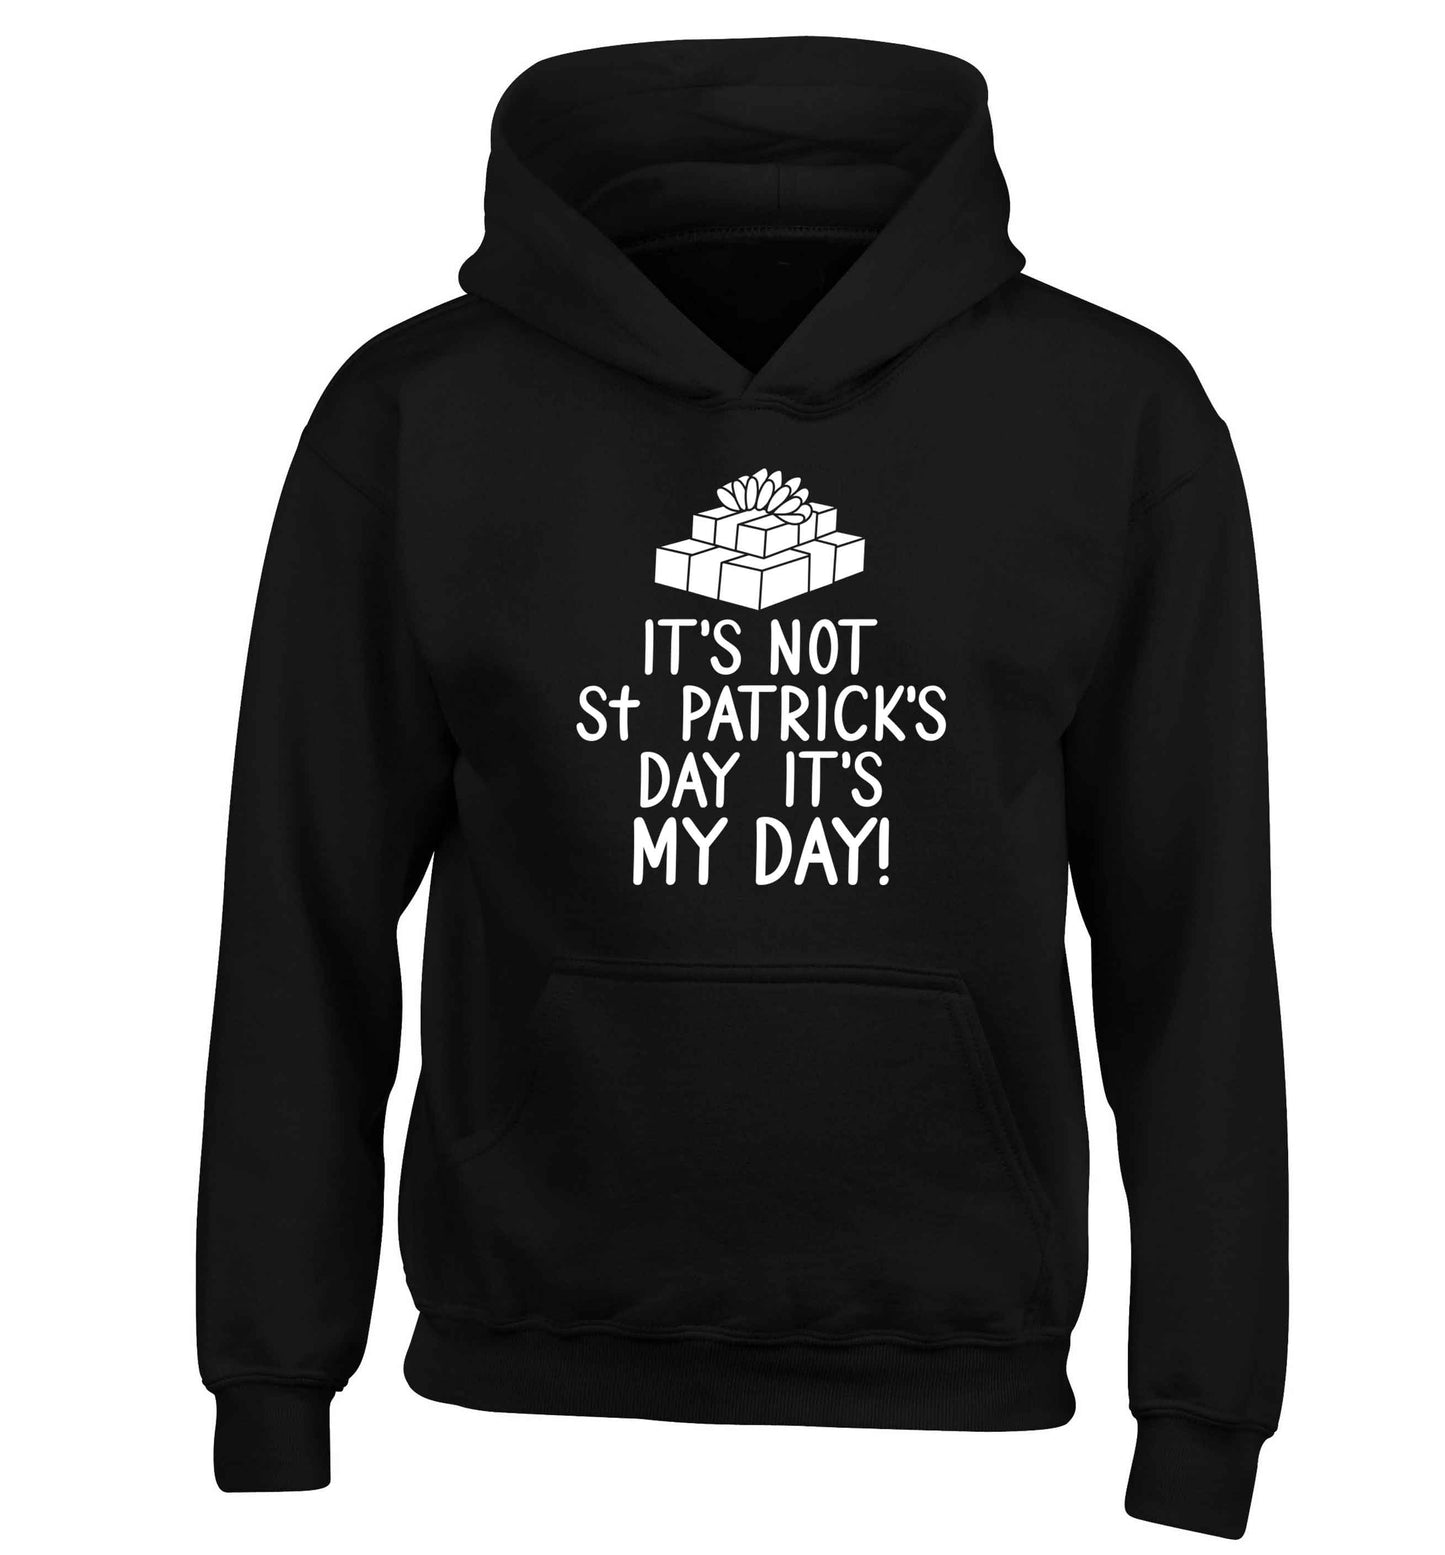 Funny gifts for your mum on mother's dayor her birthday! It's not St Patricks day it's my day children's black hoodie 12-13 Years